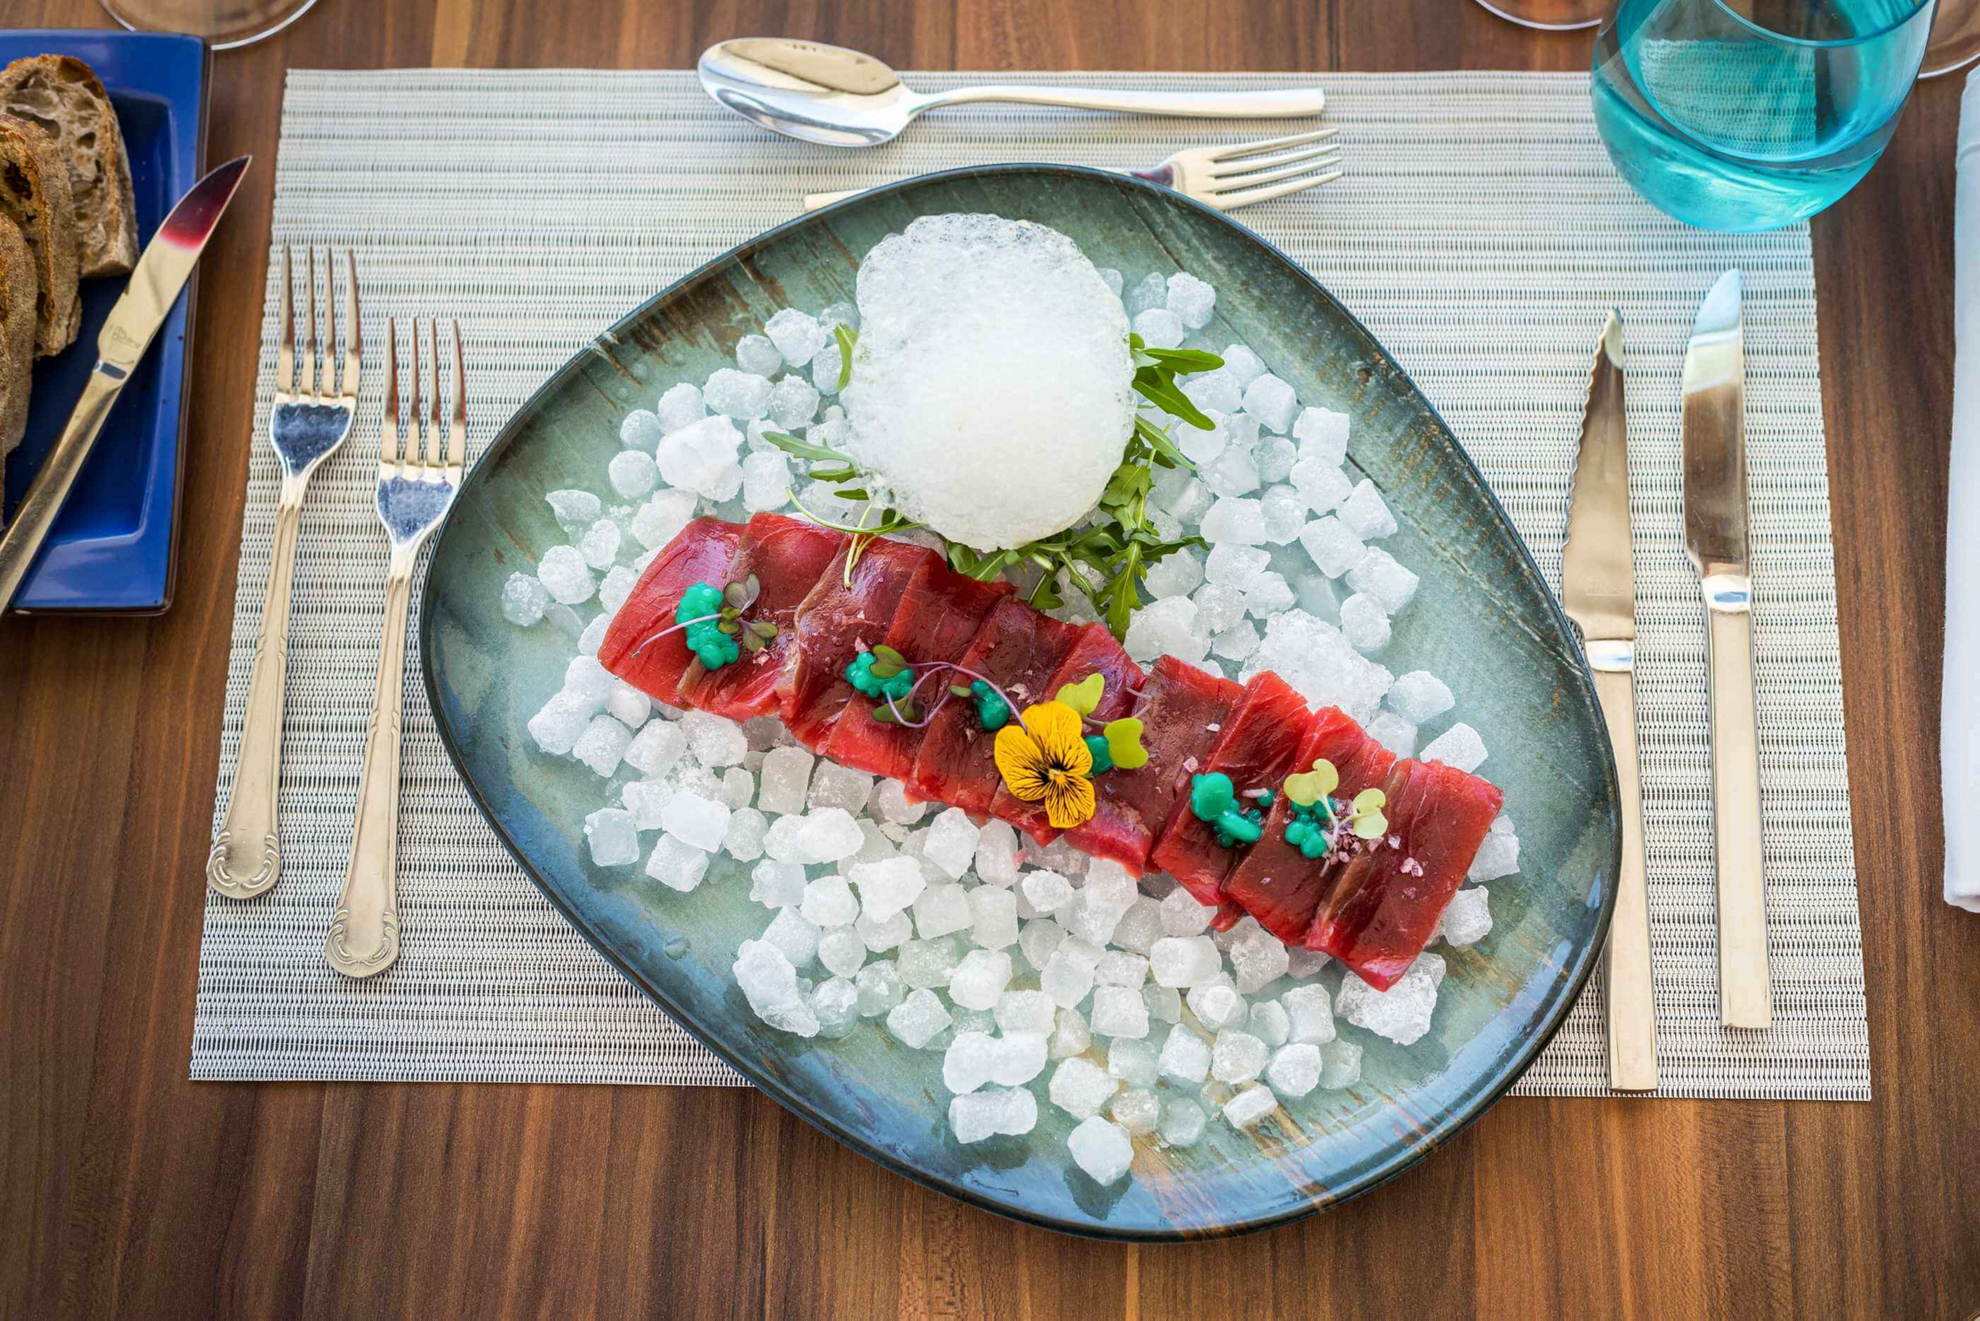 Adults-only hotels in Spain: A plate of sliced tuna on ice